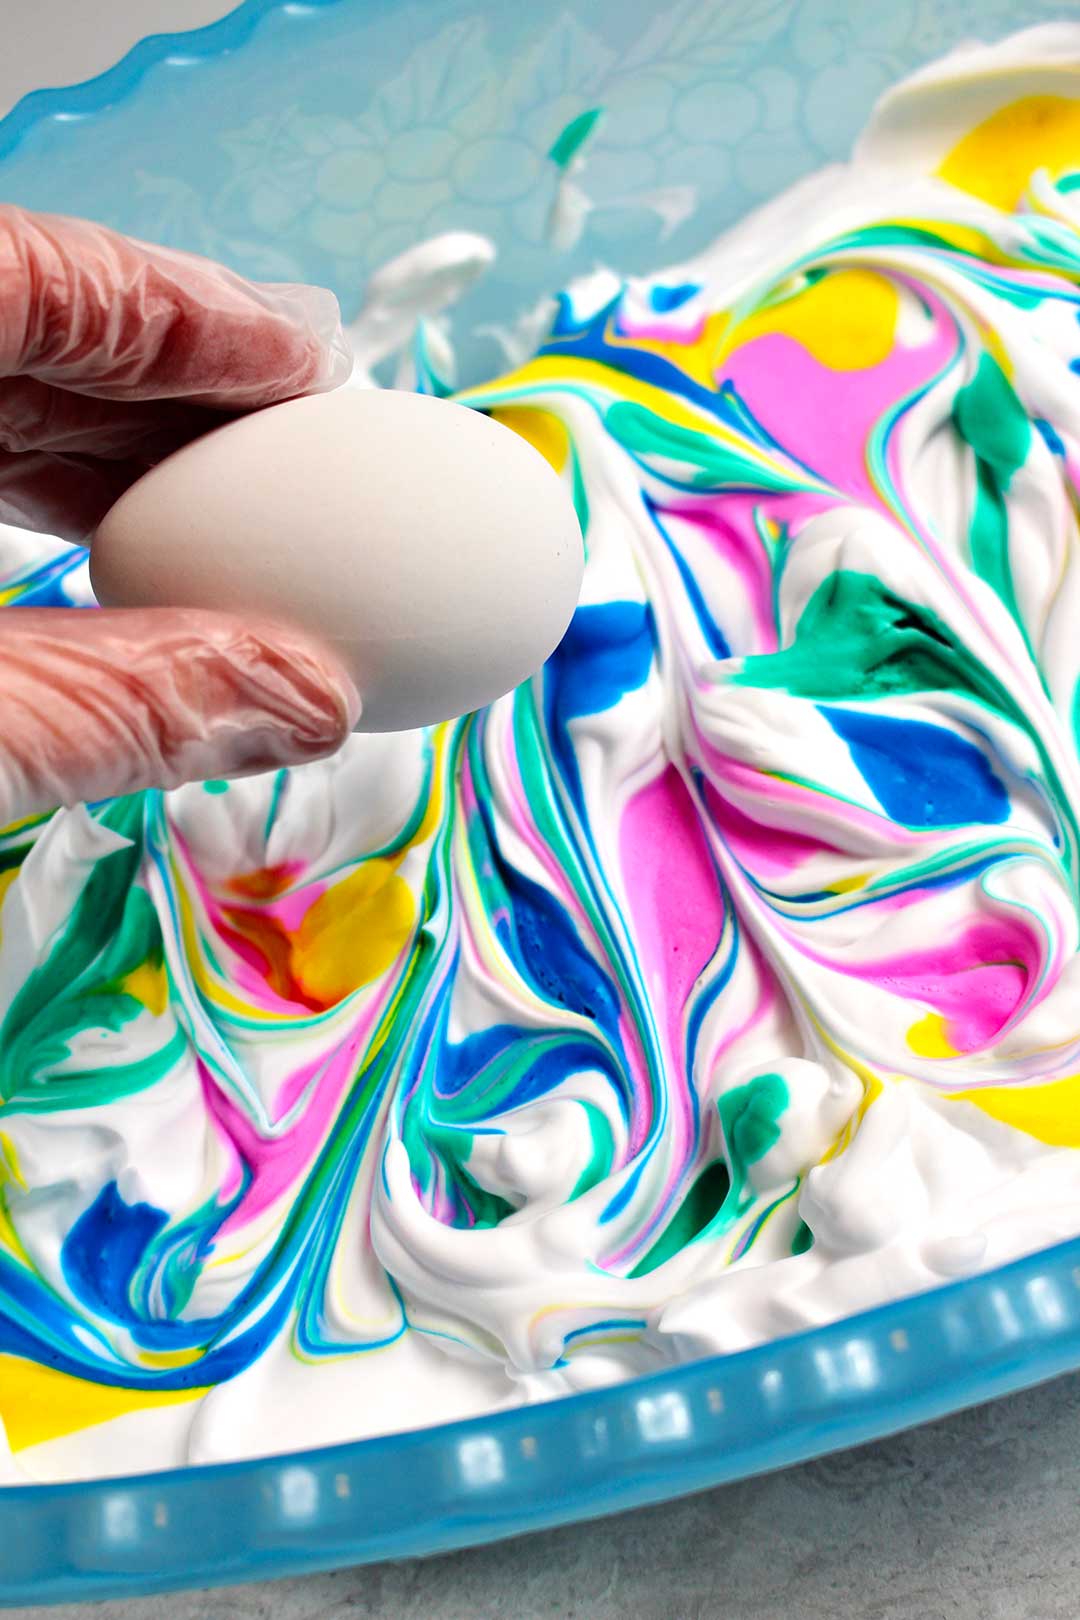 Dipping an egg into a yellow, green, pink, and blue swirled shaving cream.